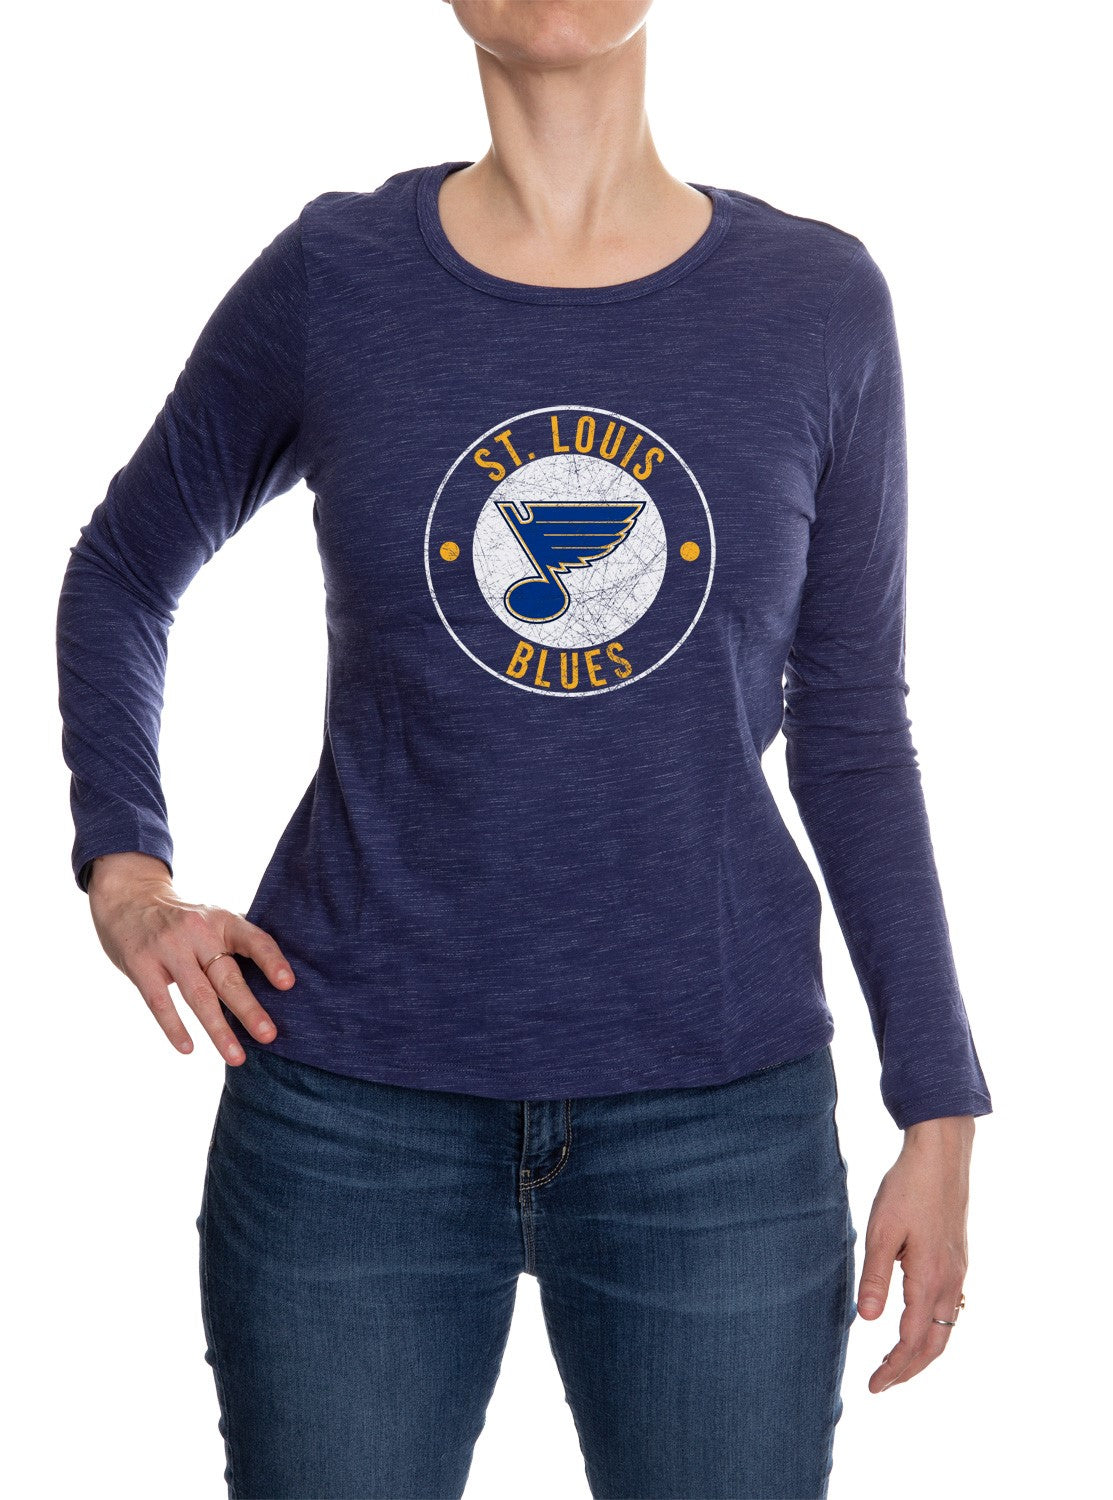 St. Louis Blues Distressed Logo Long Sleeve Shirt for Women in Blue Front VIew